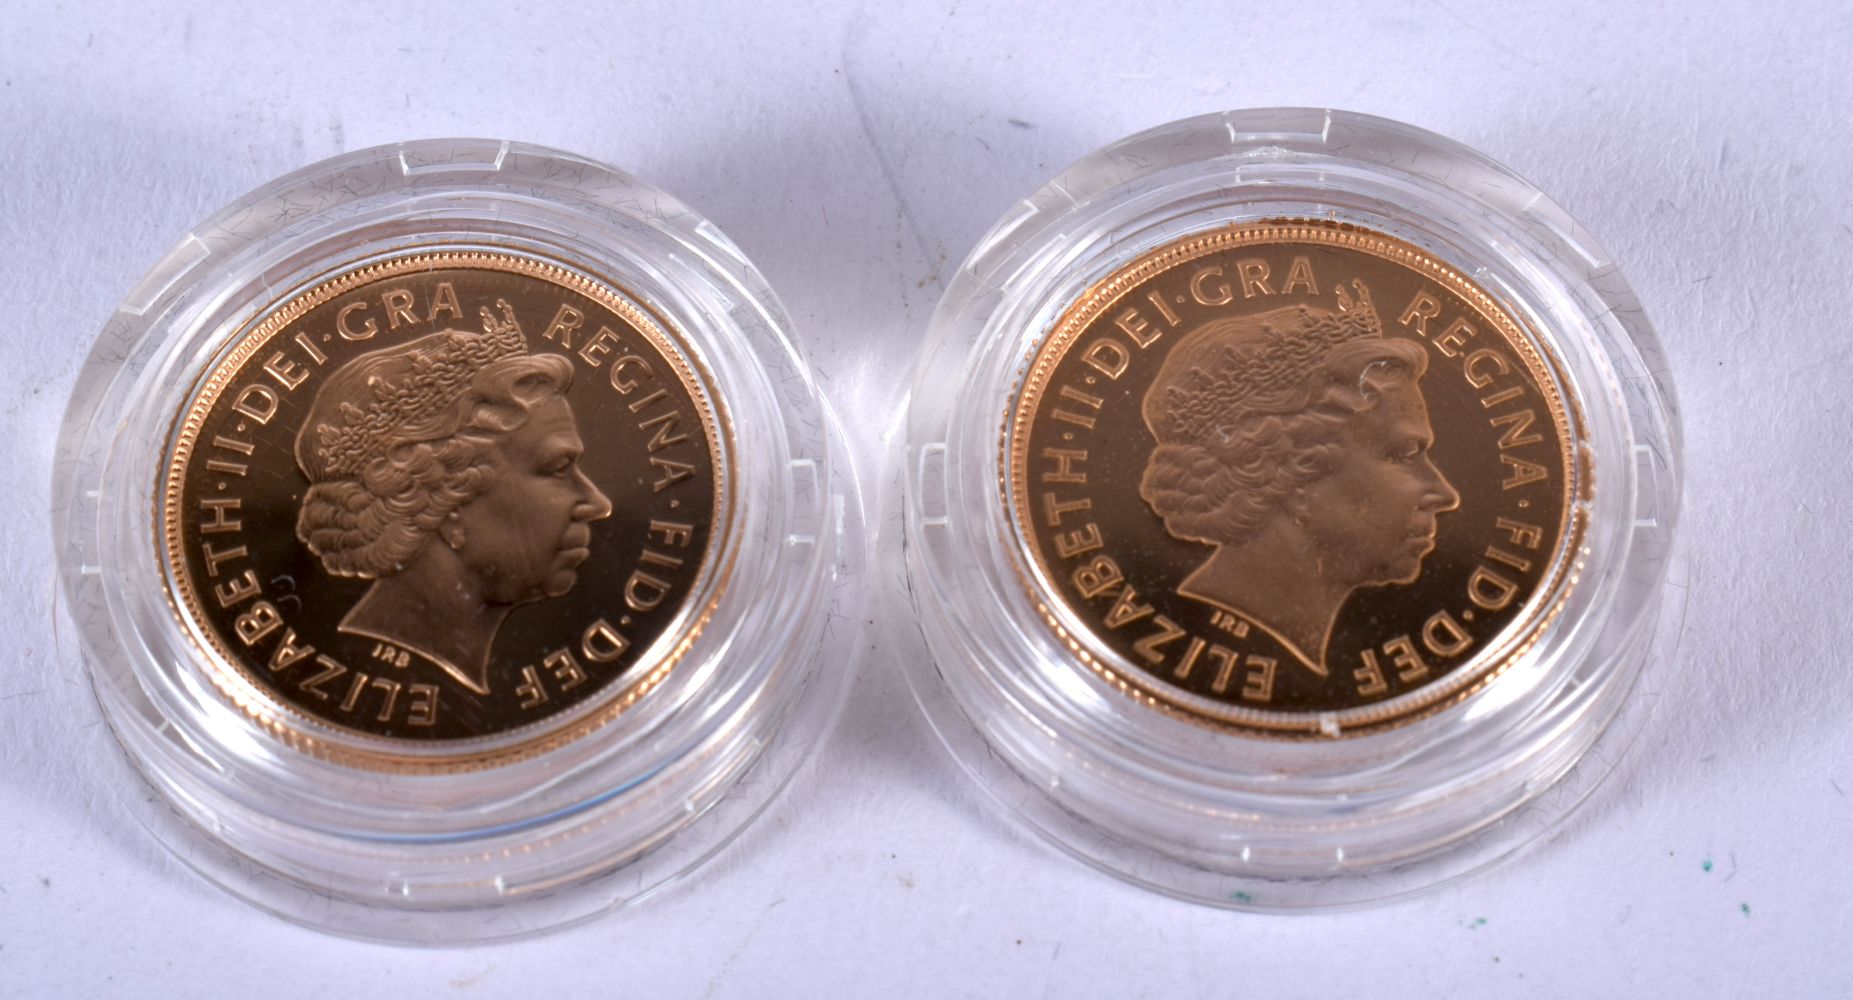 CASED SET OF ELIZABETH II 2004 AND 2005 PROOF GOLD SOVEREIGN SET COMPRISING TWO GOLD FULL SOVEREIGNS - Image 3 of 3